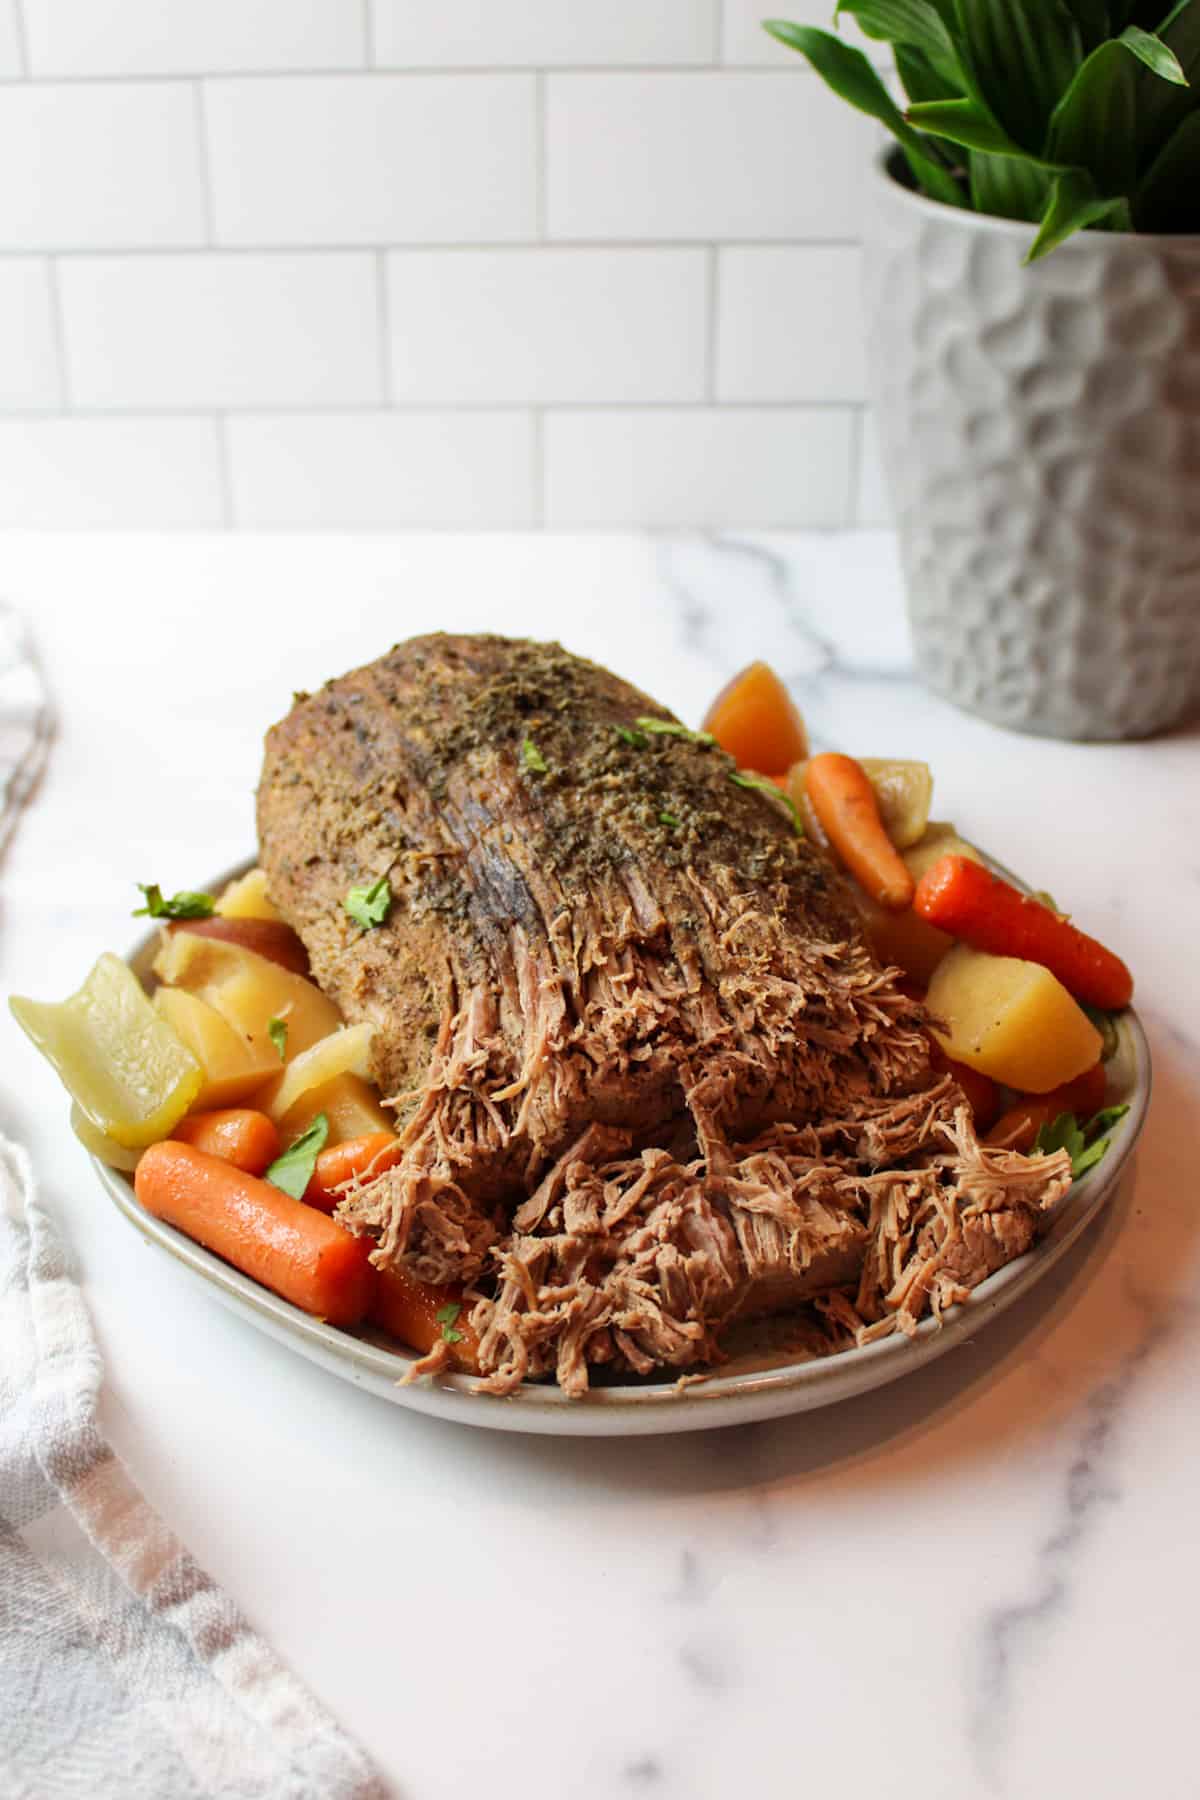 a plate of shredded beef roast and veggies.